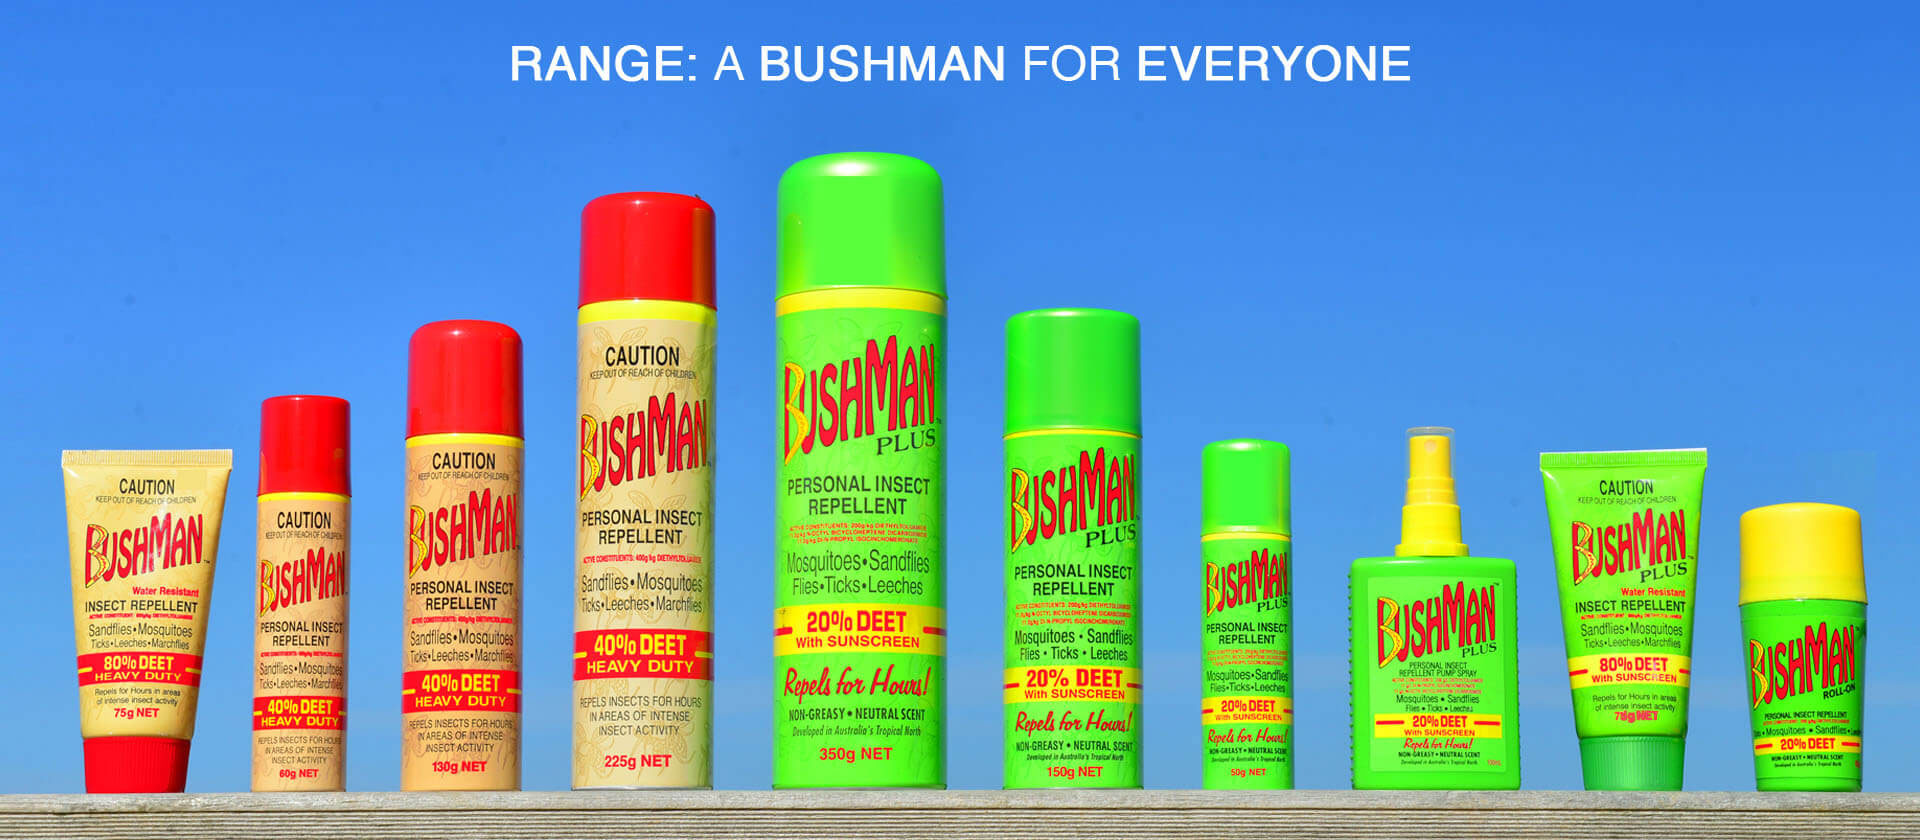 All bushman products inline on a bench banner image